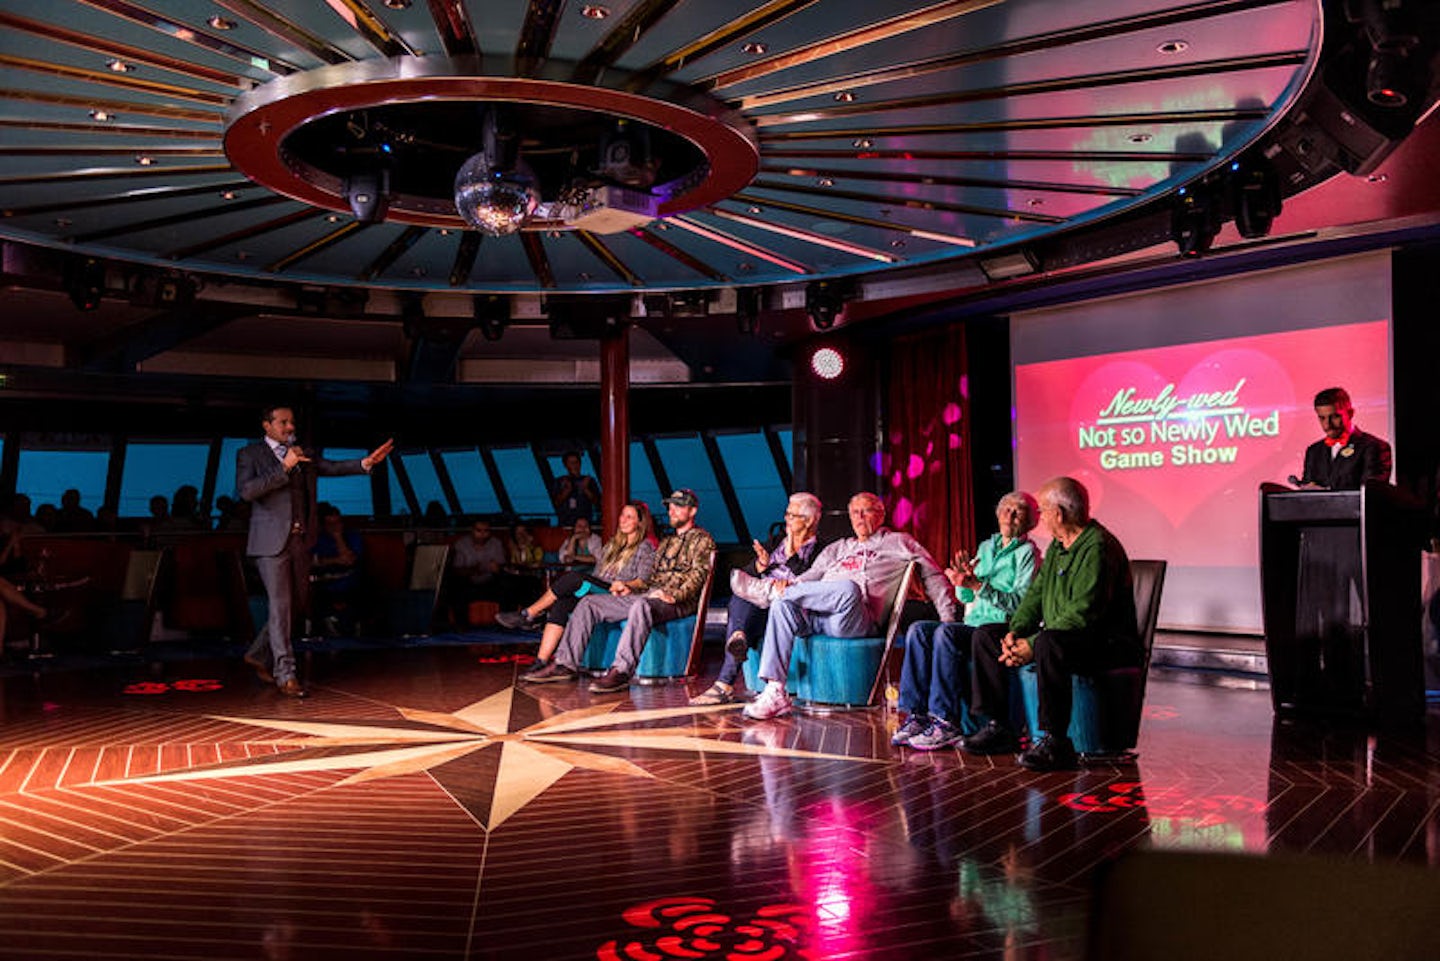 Not So Newly Wed Game Show at Spinnaker Lounge on Norwegian Pearl